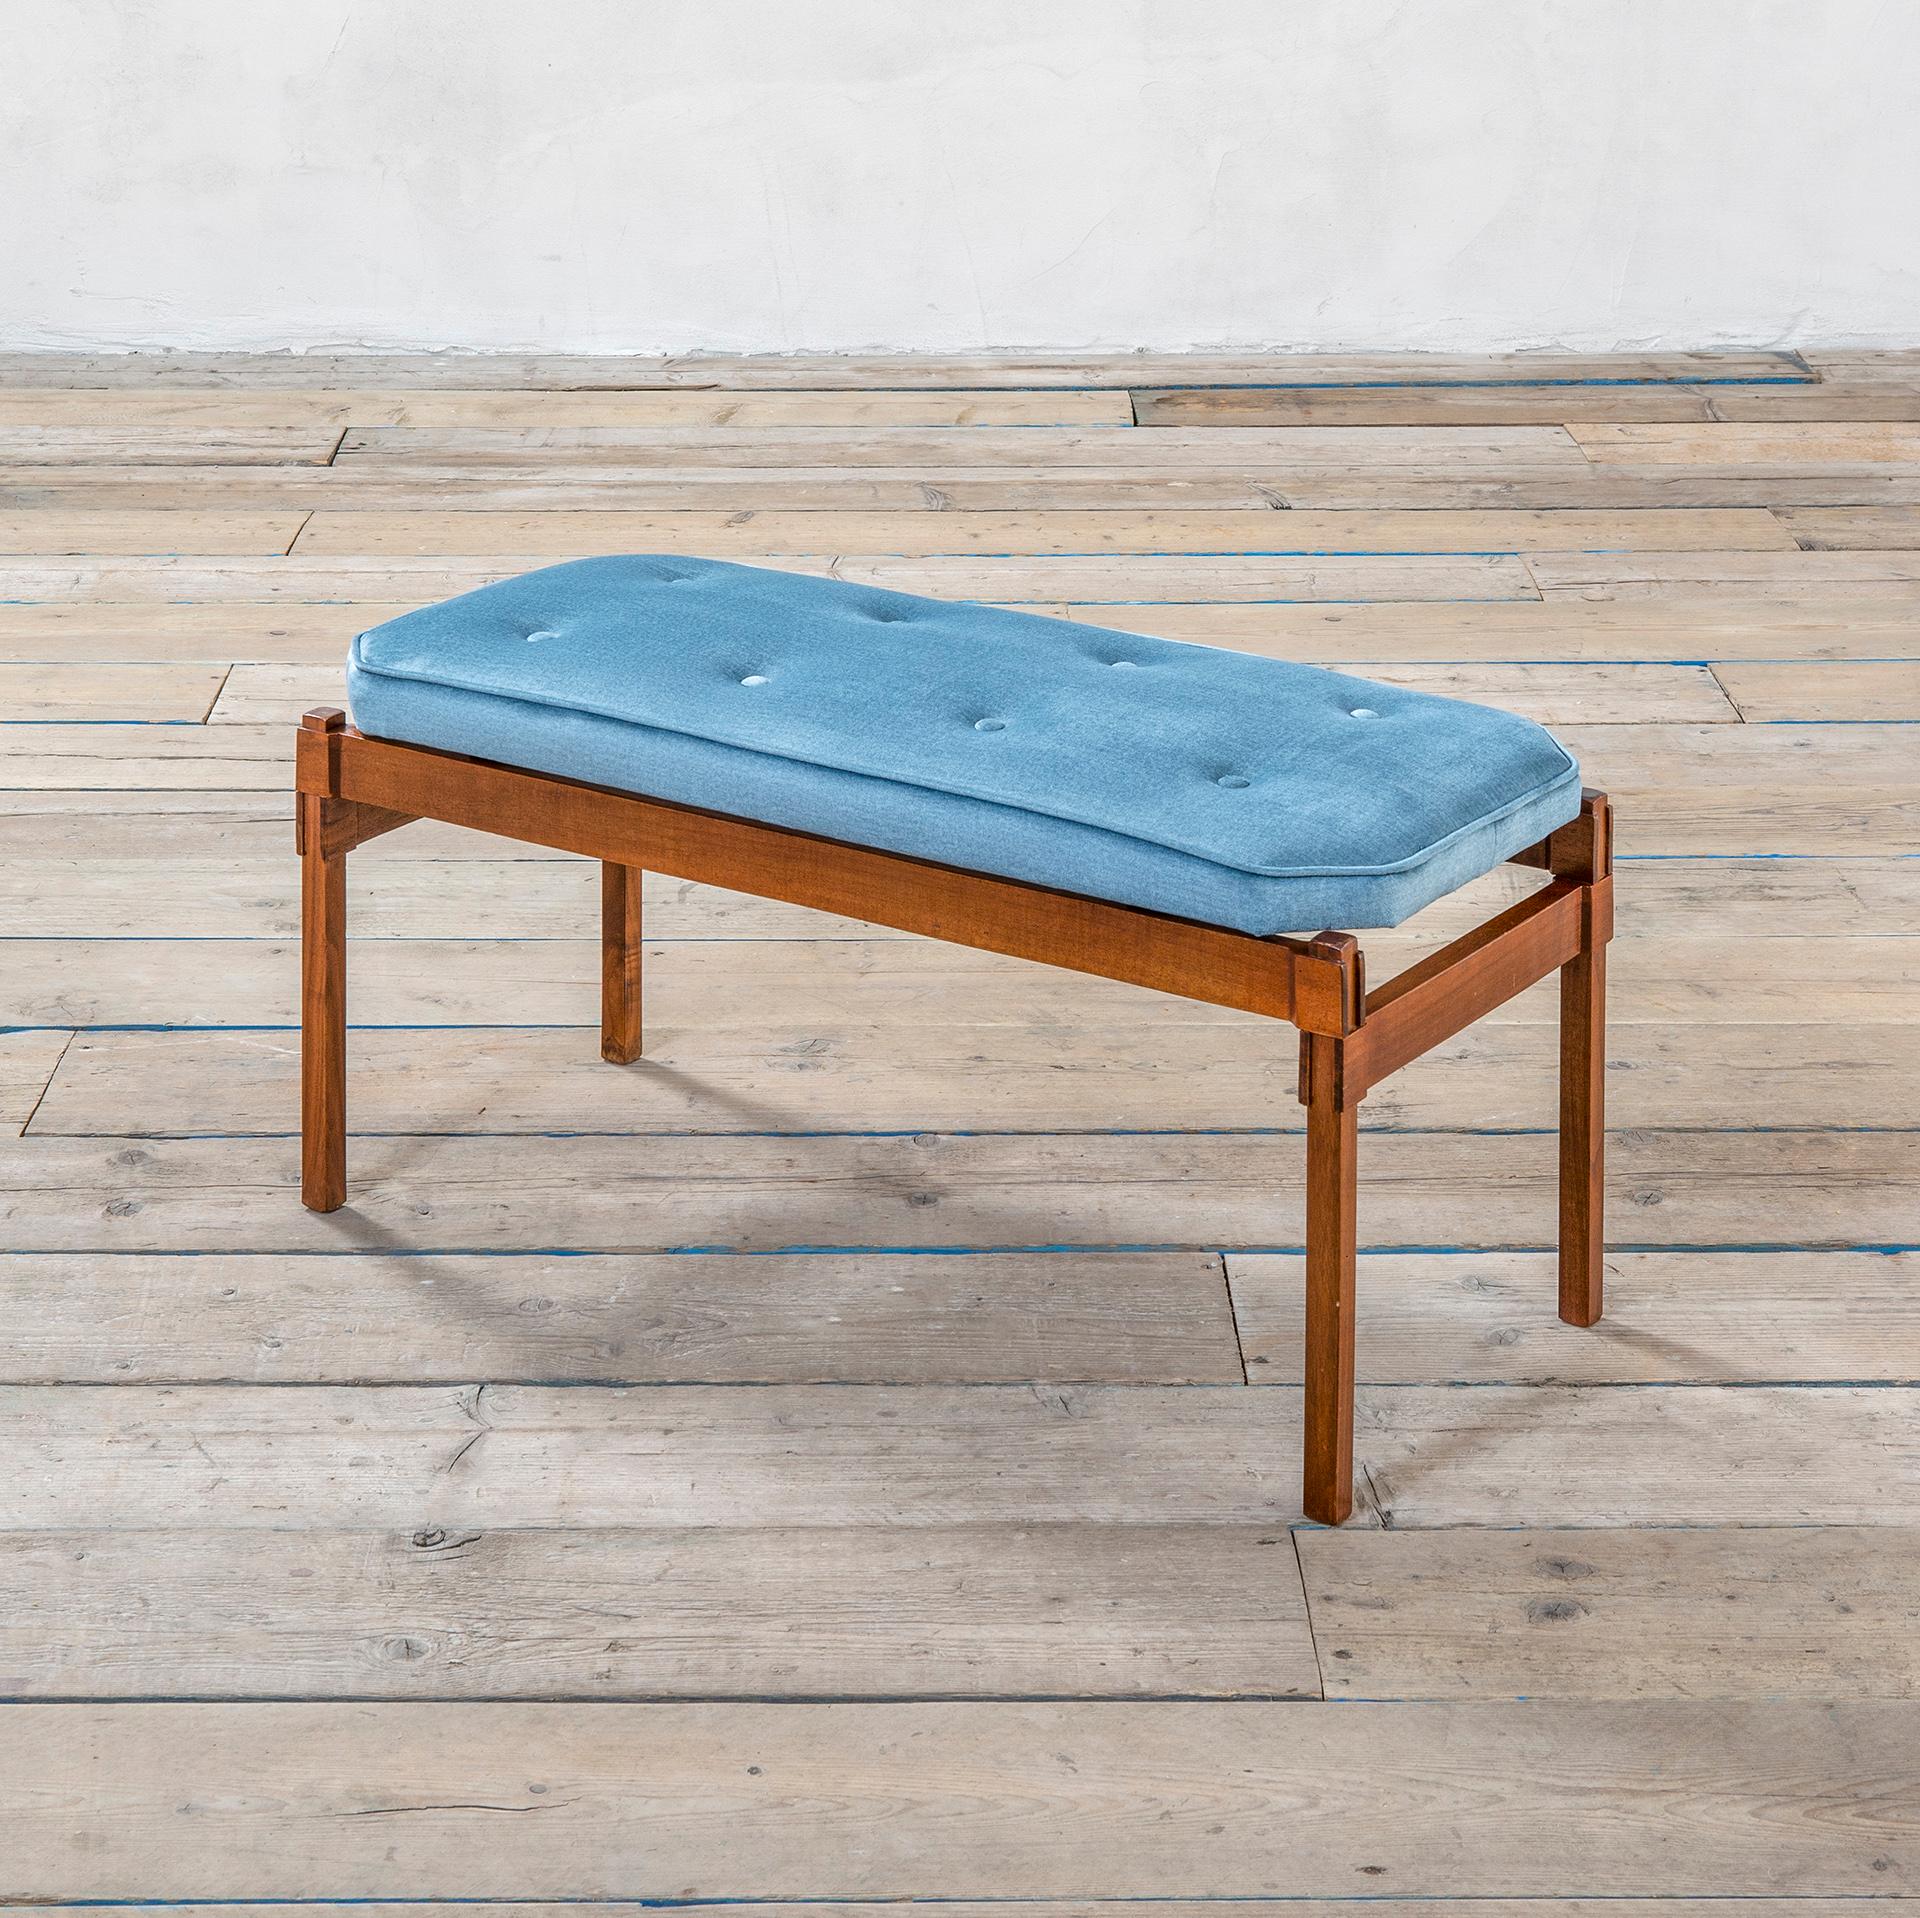 Bench designed by the great Italian master Ico Parisi in '50s. The bench has a wooden structure (teak) with wonderful attention for the corner joints, and the seating is covered by light blue velvet. The upholstery was renewed so you can consider